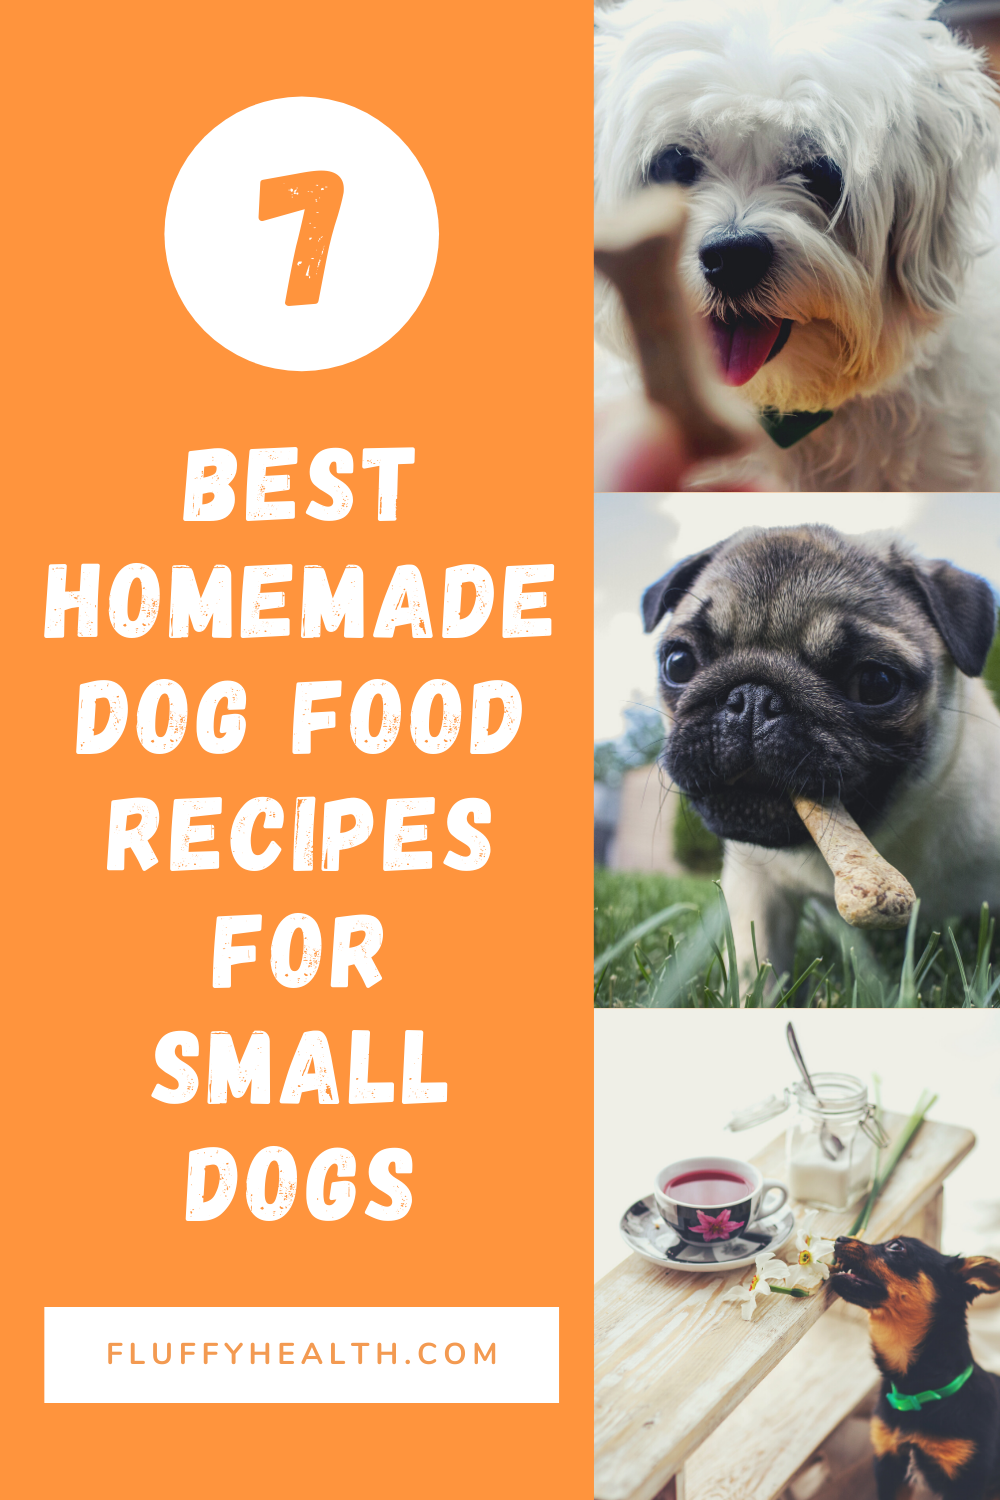 Homemade-Dog-Food-Recipes-For-Small-Dogs